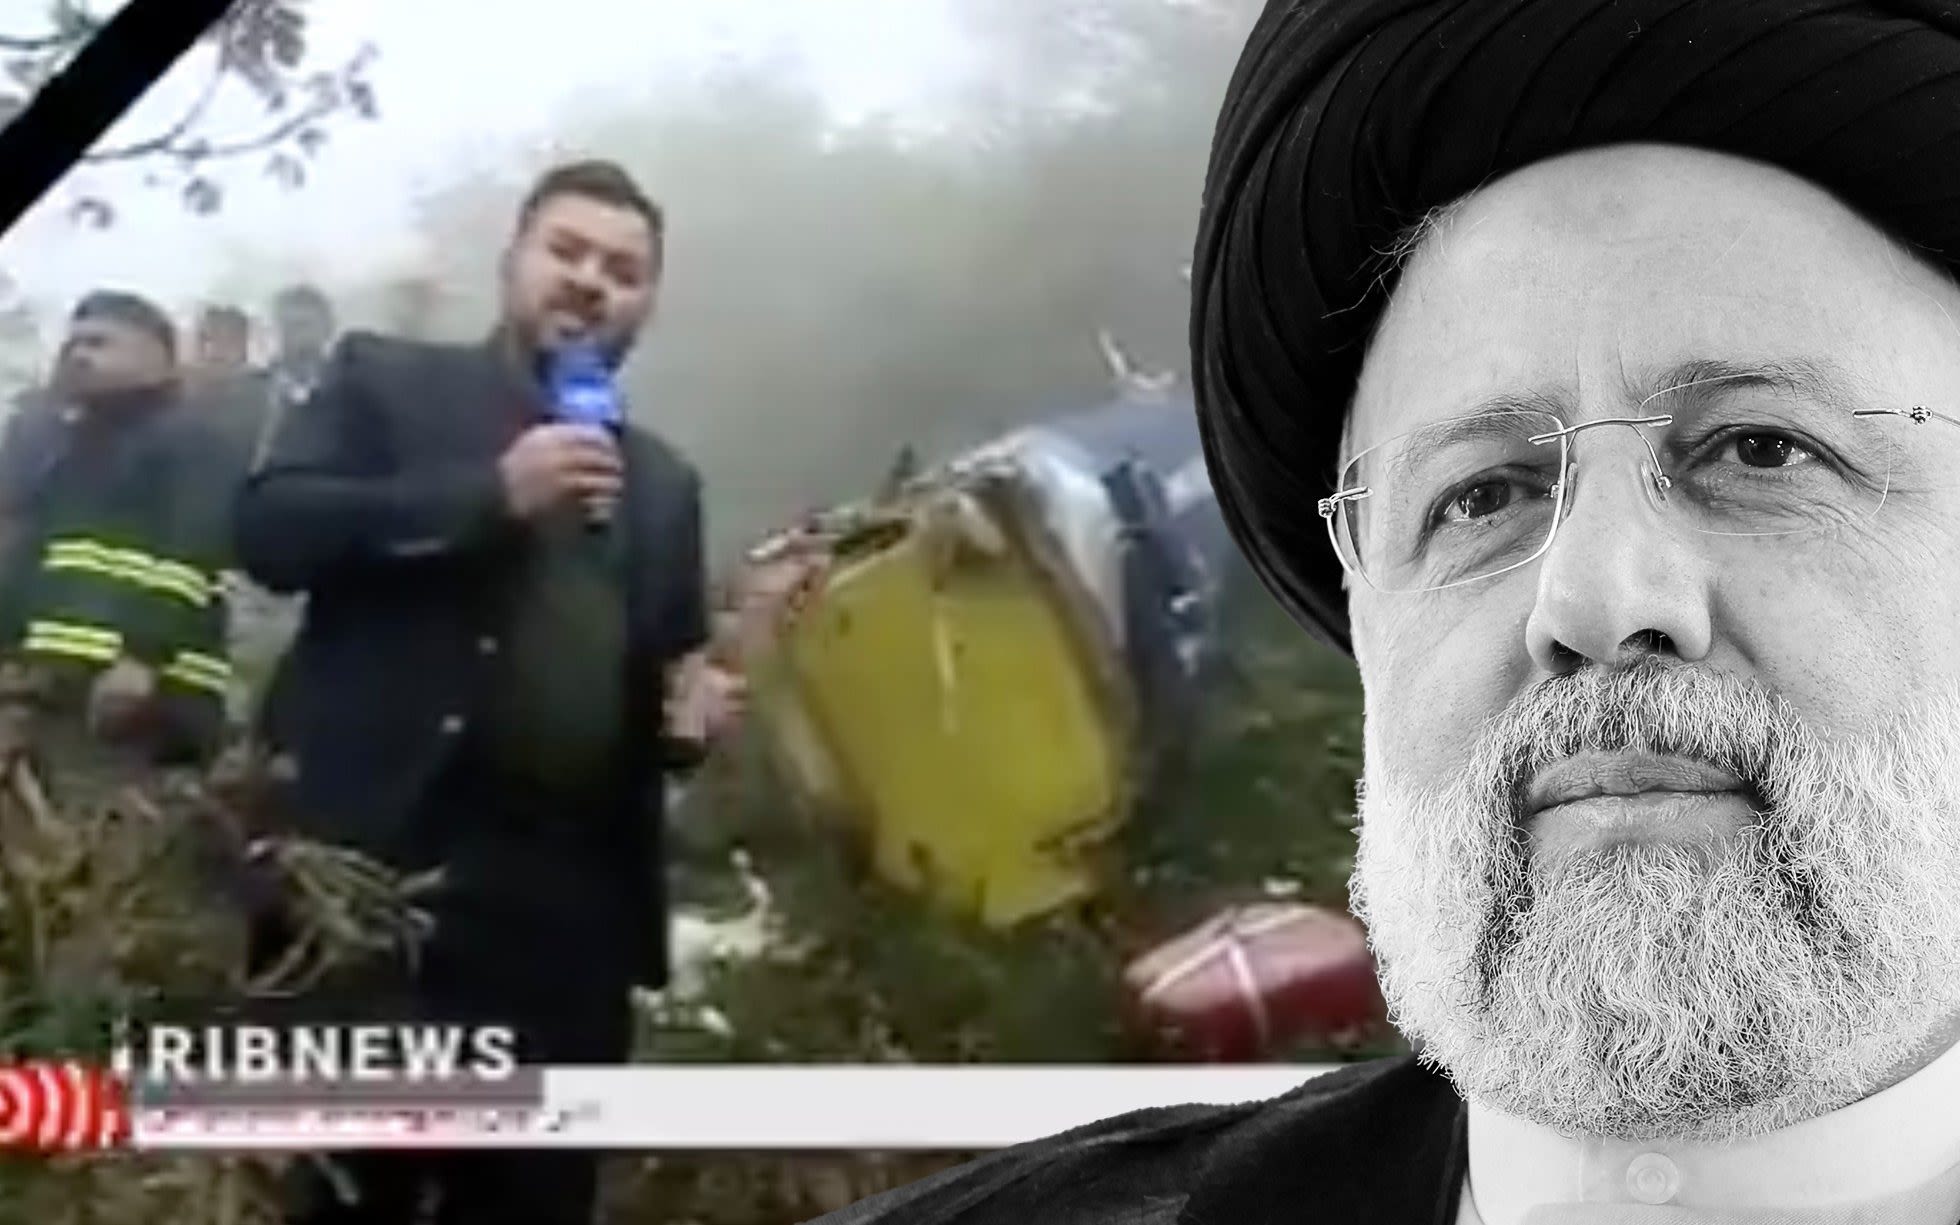 Will Iran blame Israel for the helicopter crash? The finger-pointing has already begun